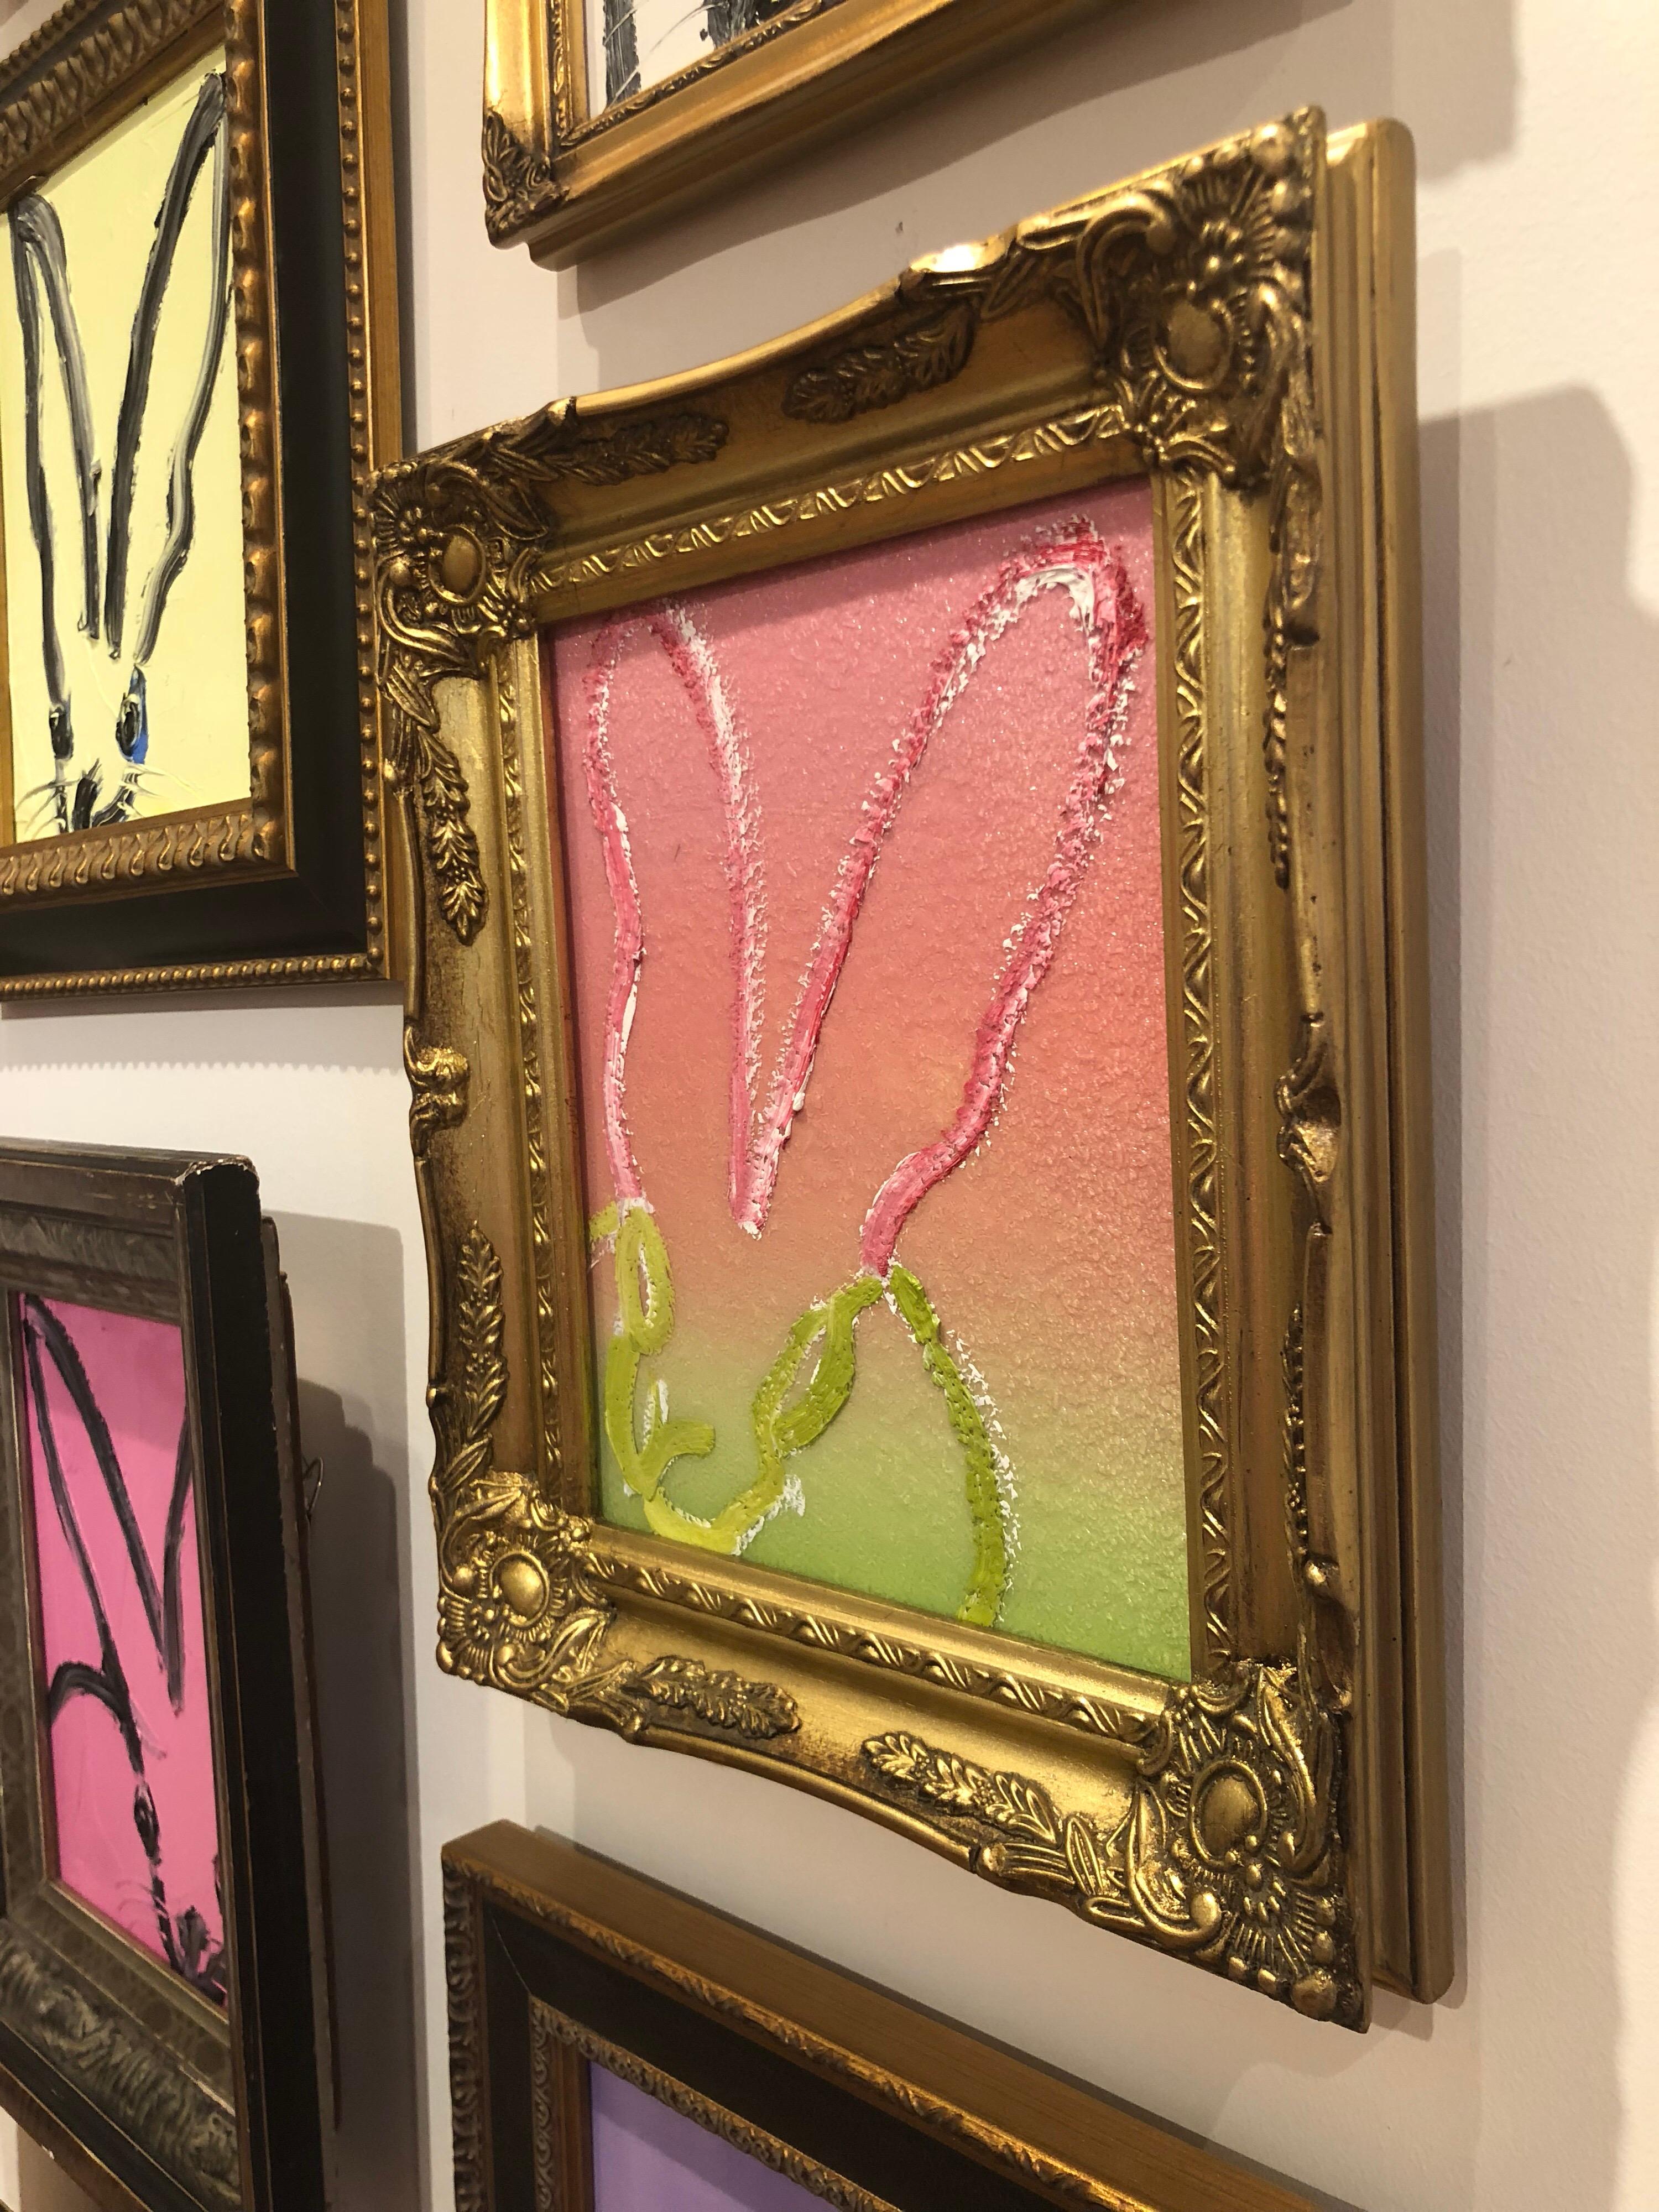 Artist:  Slonem, Hunt
Title:  Diamond Ombre Bunny
Date:  2018
Medium:  Oil on panel with acrylic and diamond dust
Framed Dimensions:  10